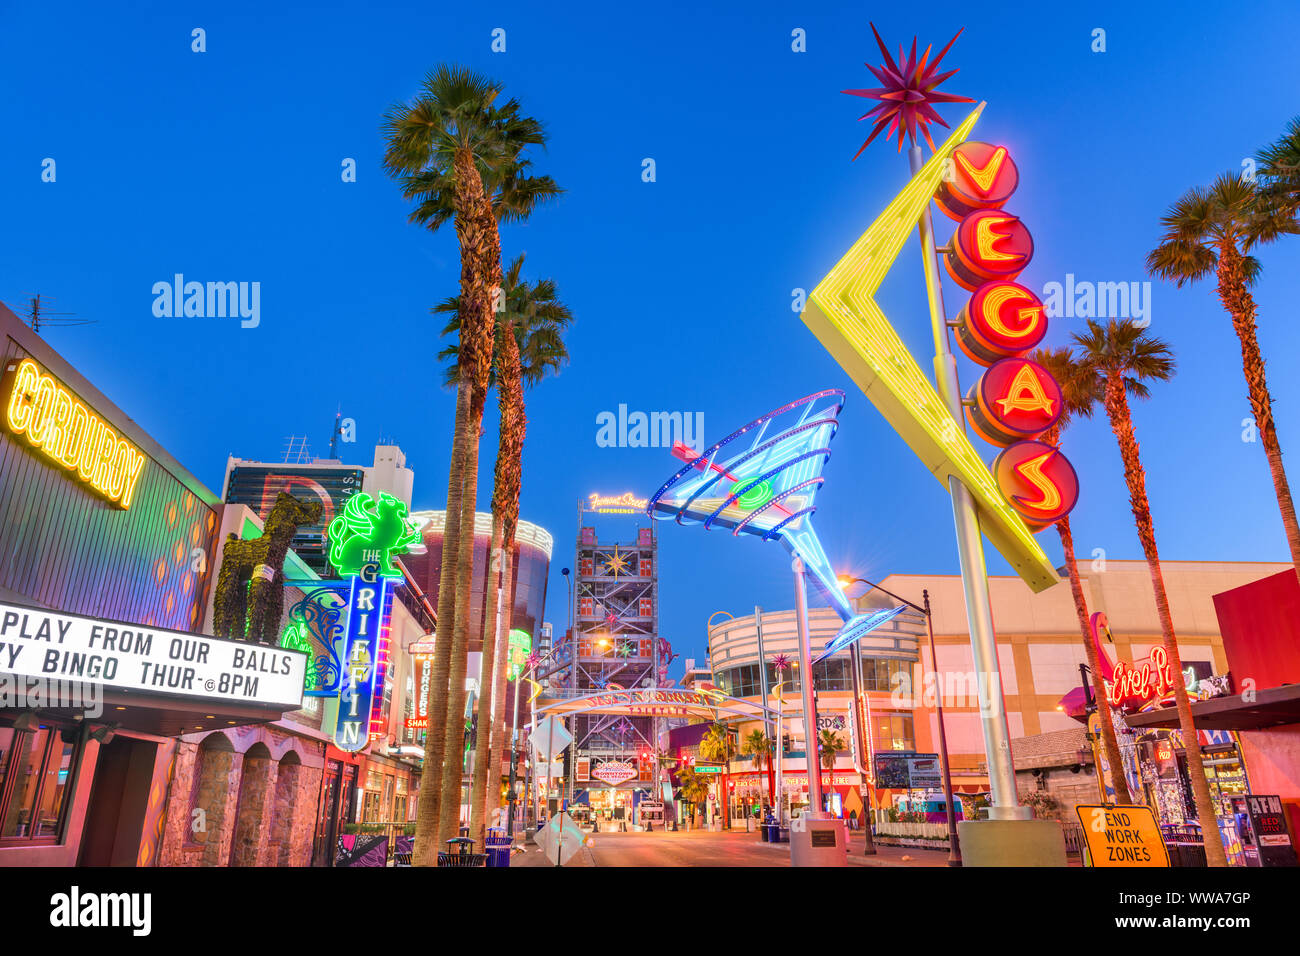 LAS VEGAS, NEVADA - MAY 13, 2019: Fremont East District of Las Vegas at dawn. It is among the most famous streets in the Las Vegas Valley. Stock Photo